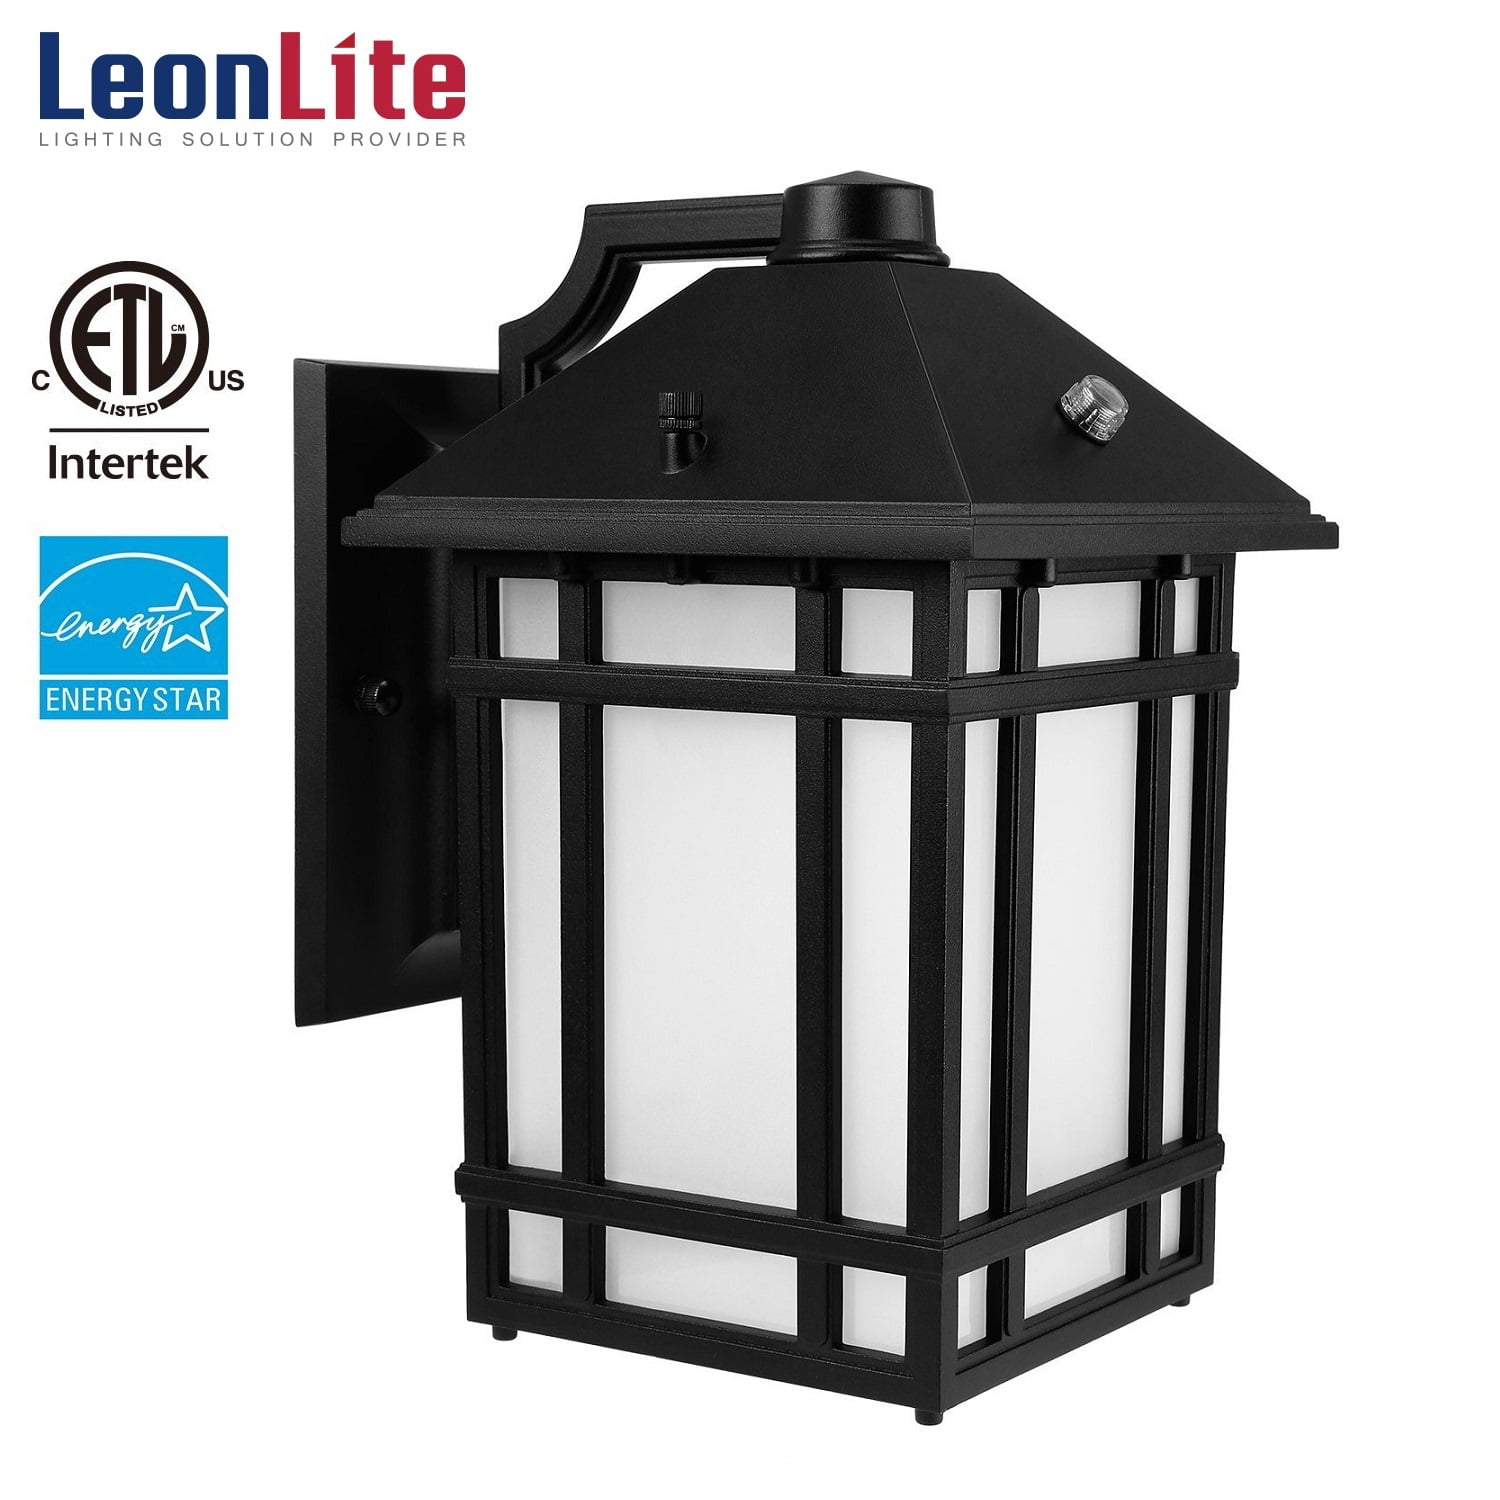 Leonlite 14w Led Outdoor Security Light, Outdoor Lighting Dusk To Dawn Led